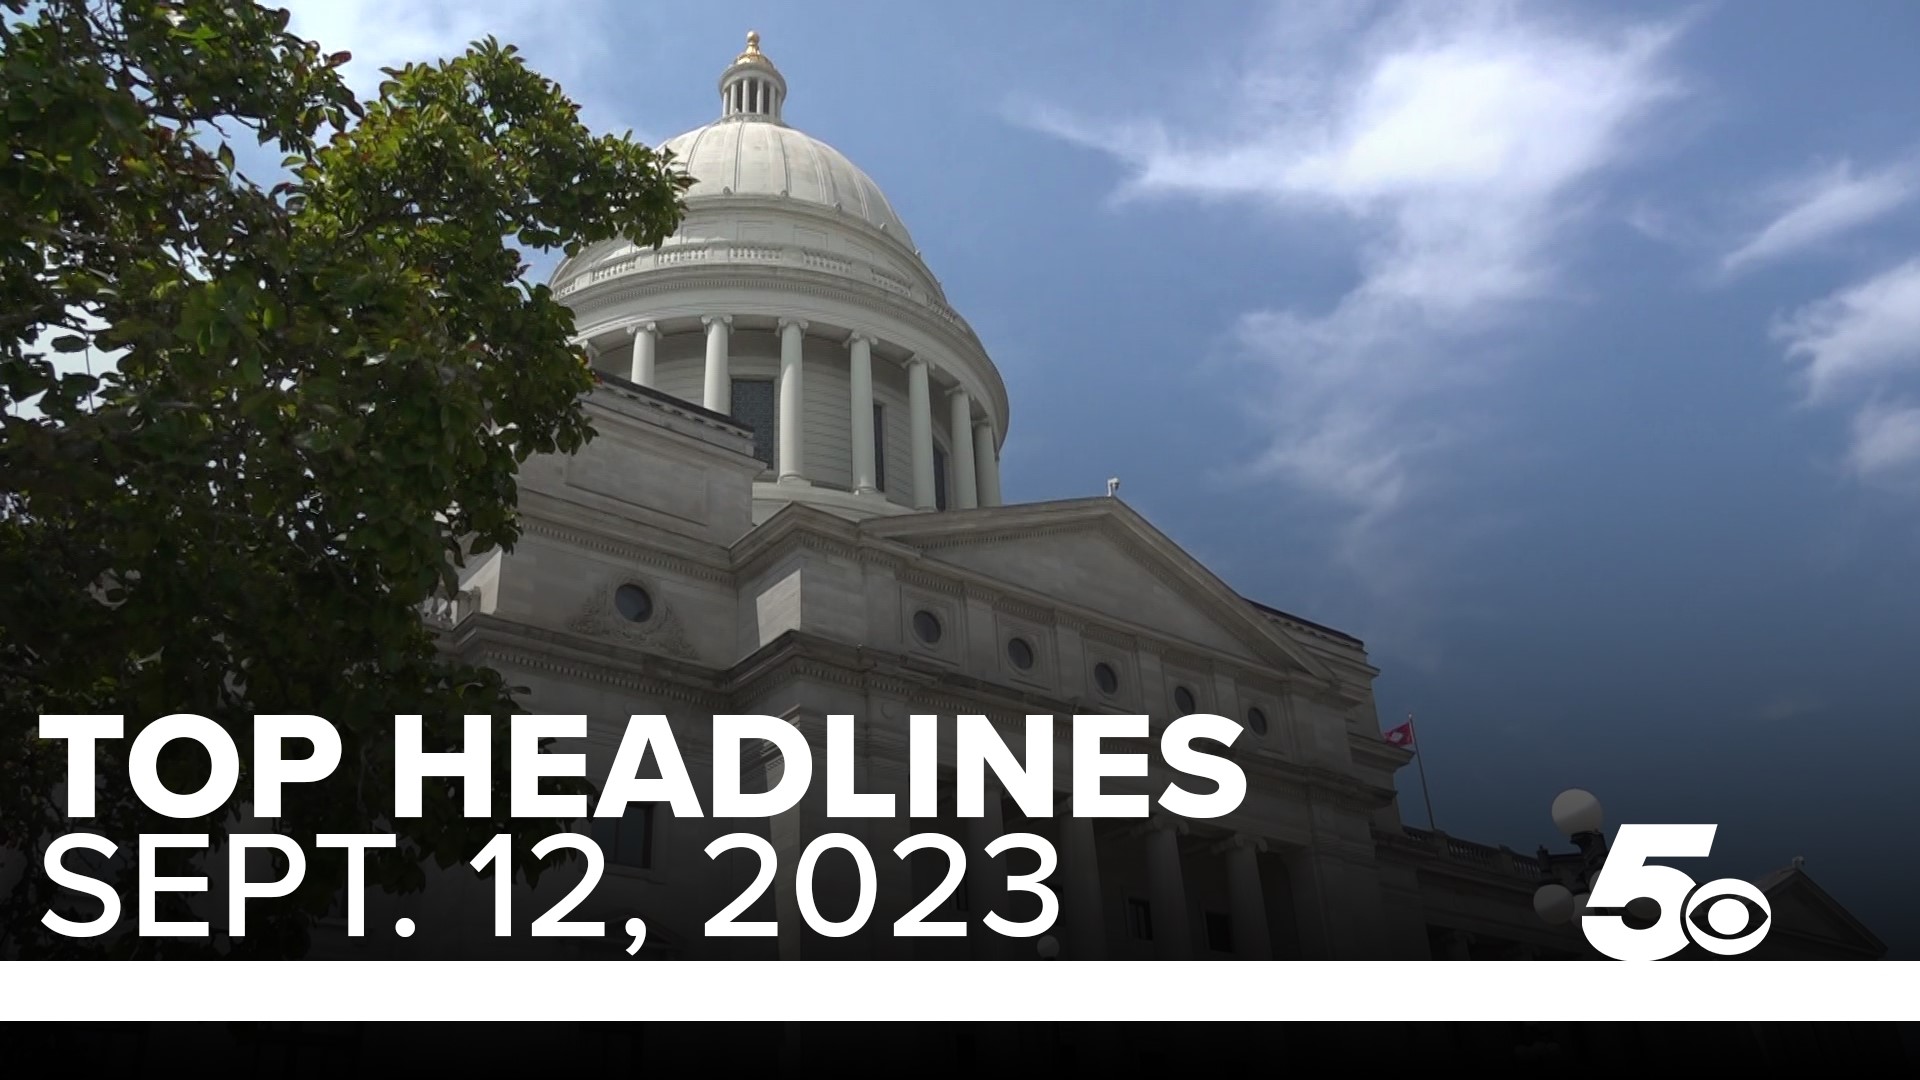 Top headlines for Northwest Arkansas and the River Valley for September 12, 2023.